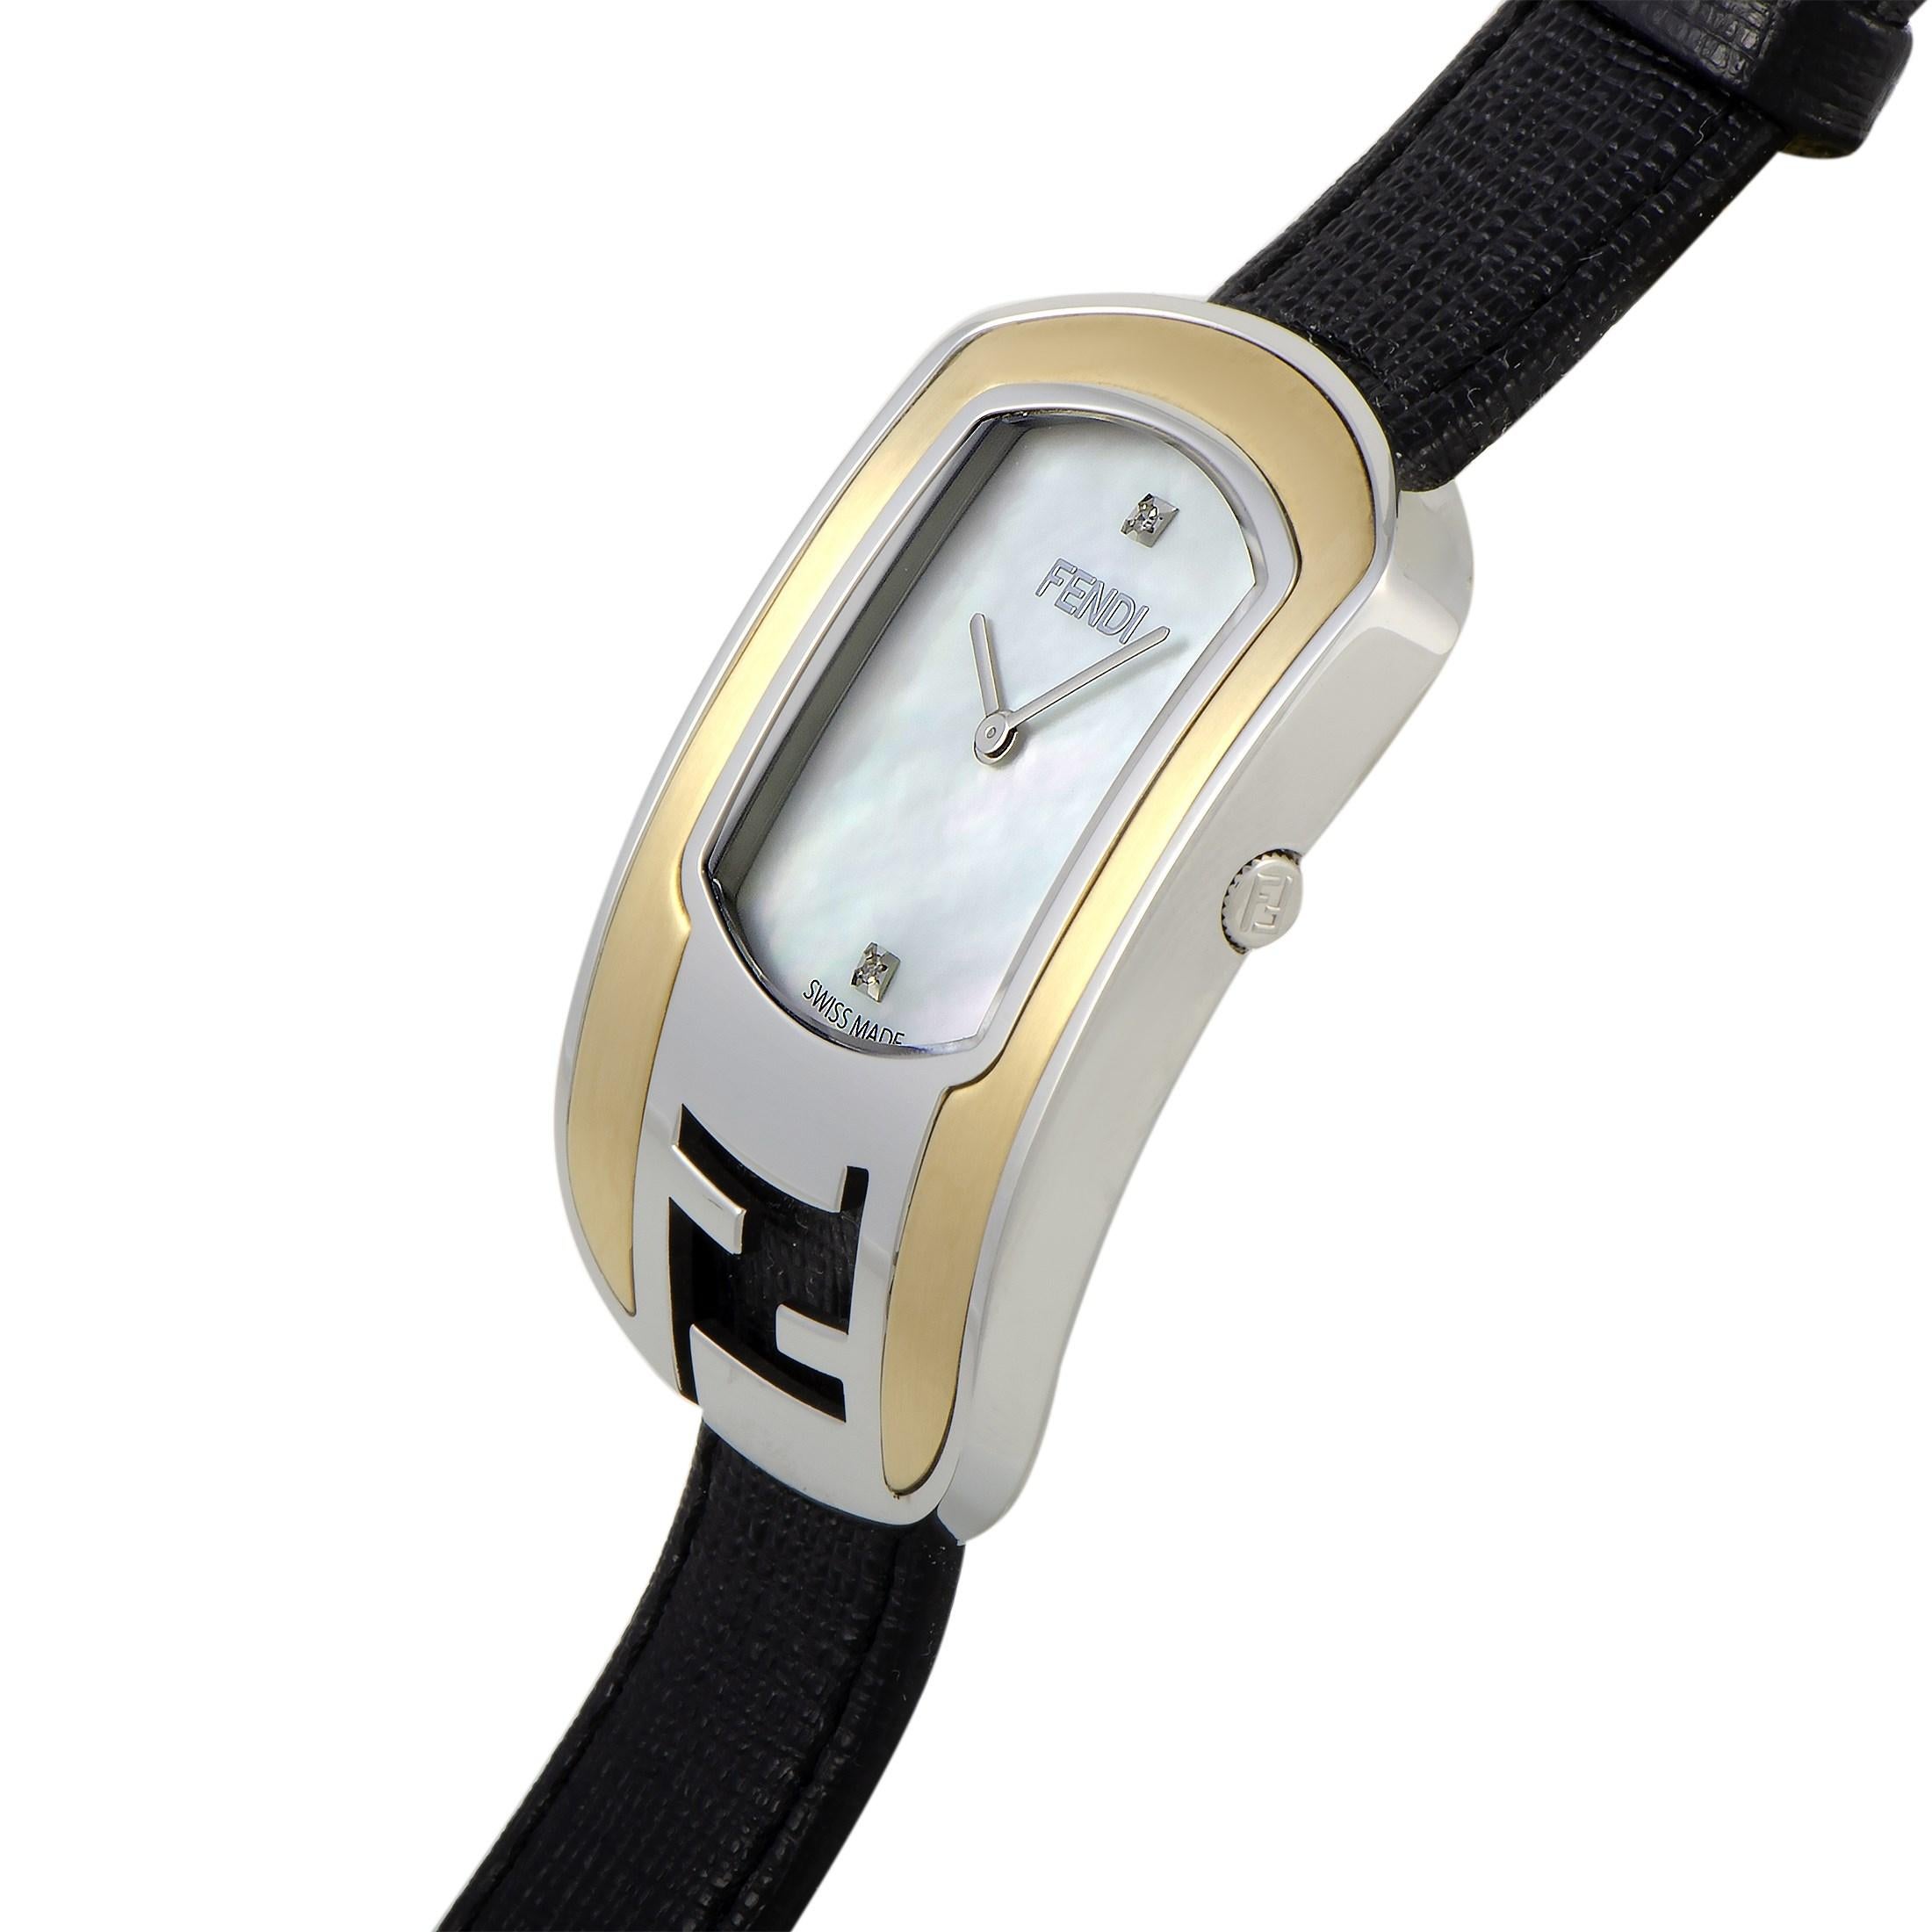 This is the Fendi Chameleon watch, reference number F303134511D1.

It is presented with a two-tone stainless steel case that offers water resistance of 30 meters. The watch is worn on a black leather strap fitted with a tang buckle. The mother of